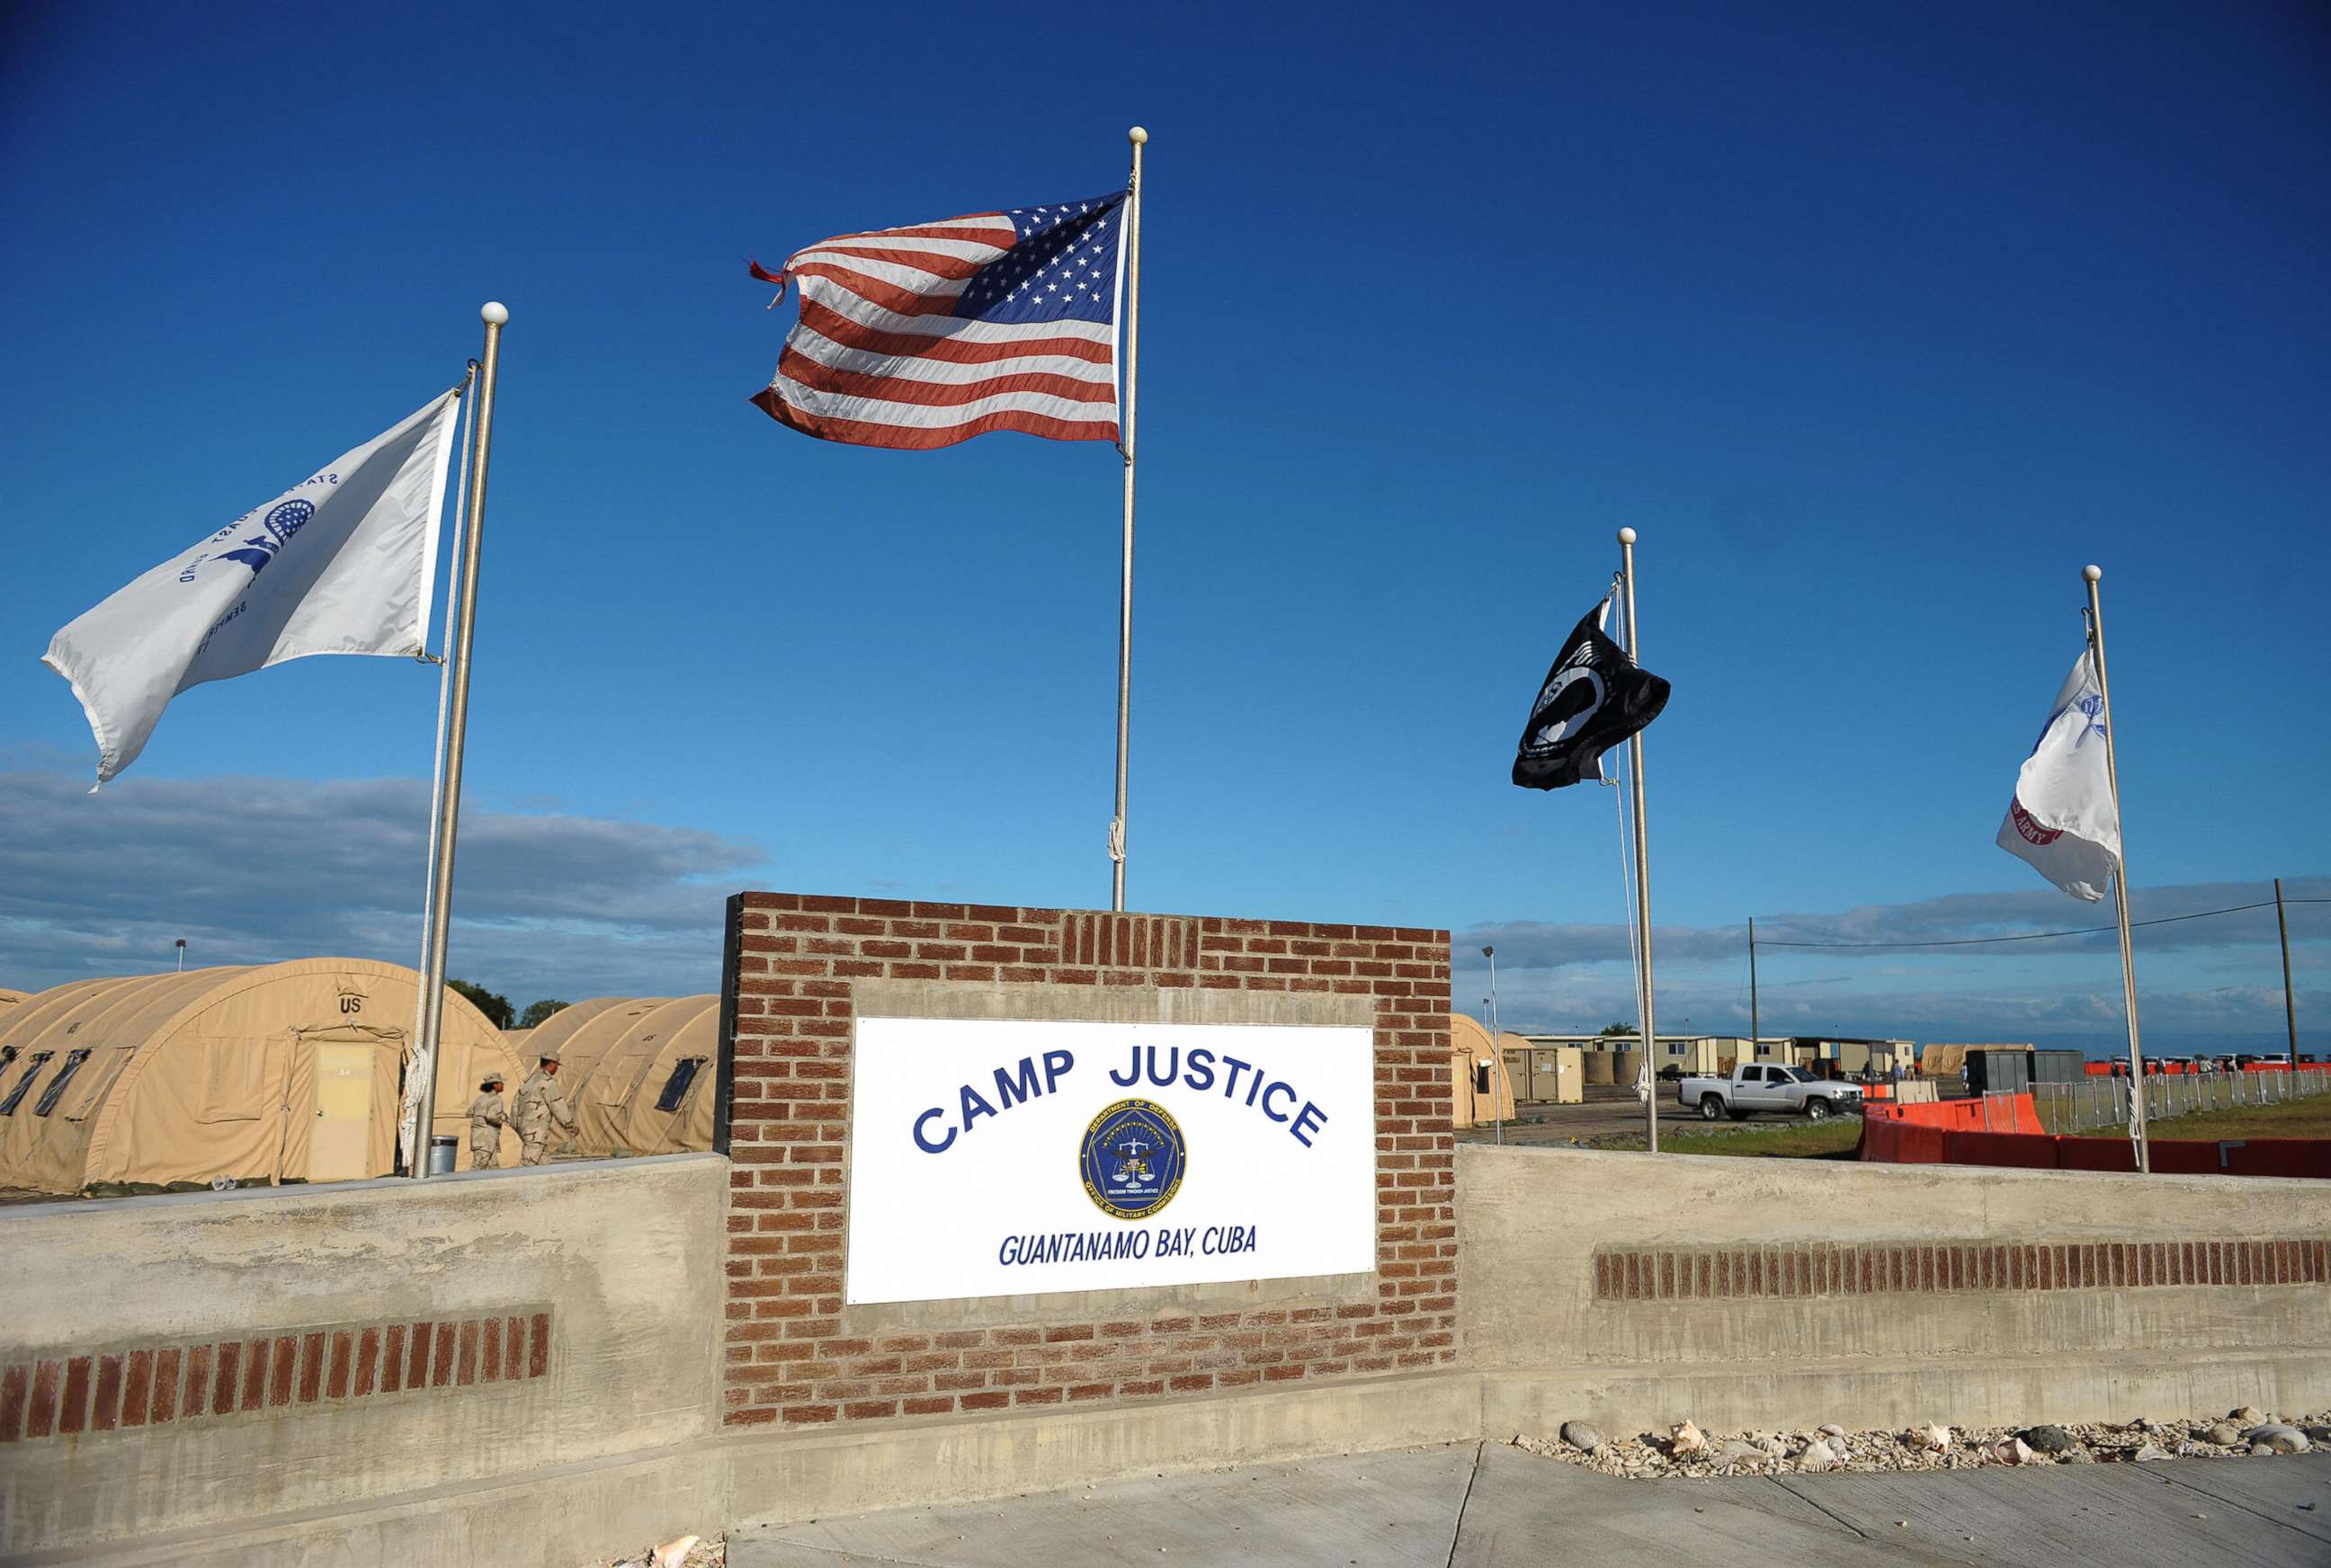 PHOTO: An image reviewed by the US military shows a "Camp Justice" in Guantanamo Bay, Dec. 8, 2008.